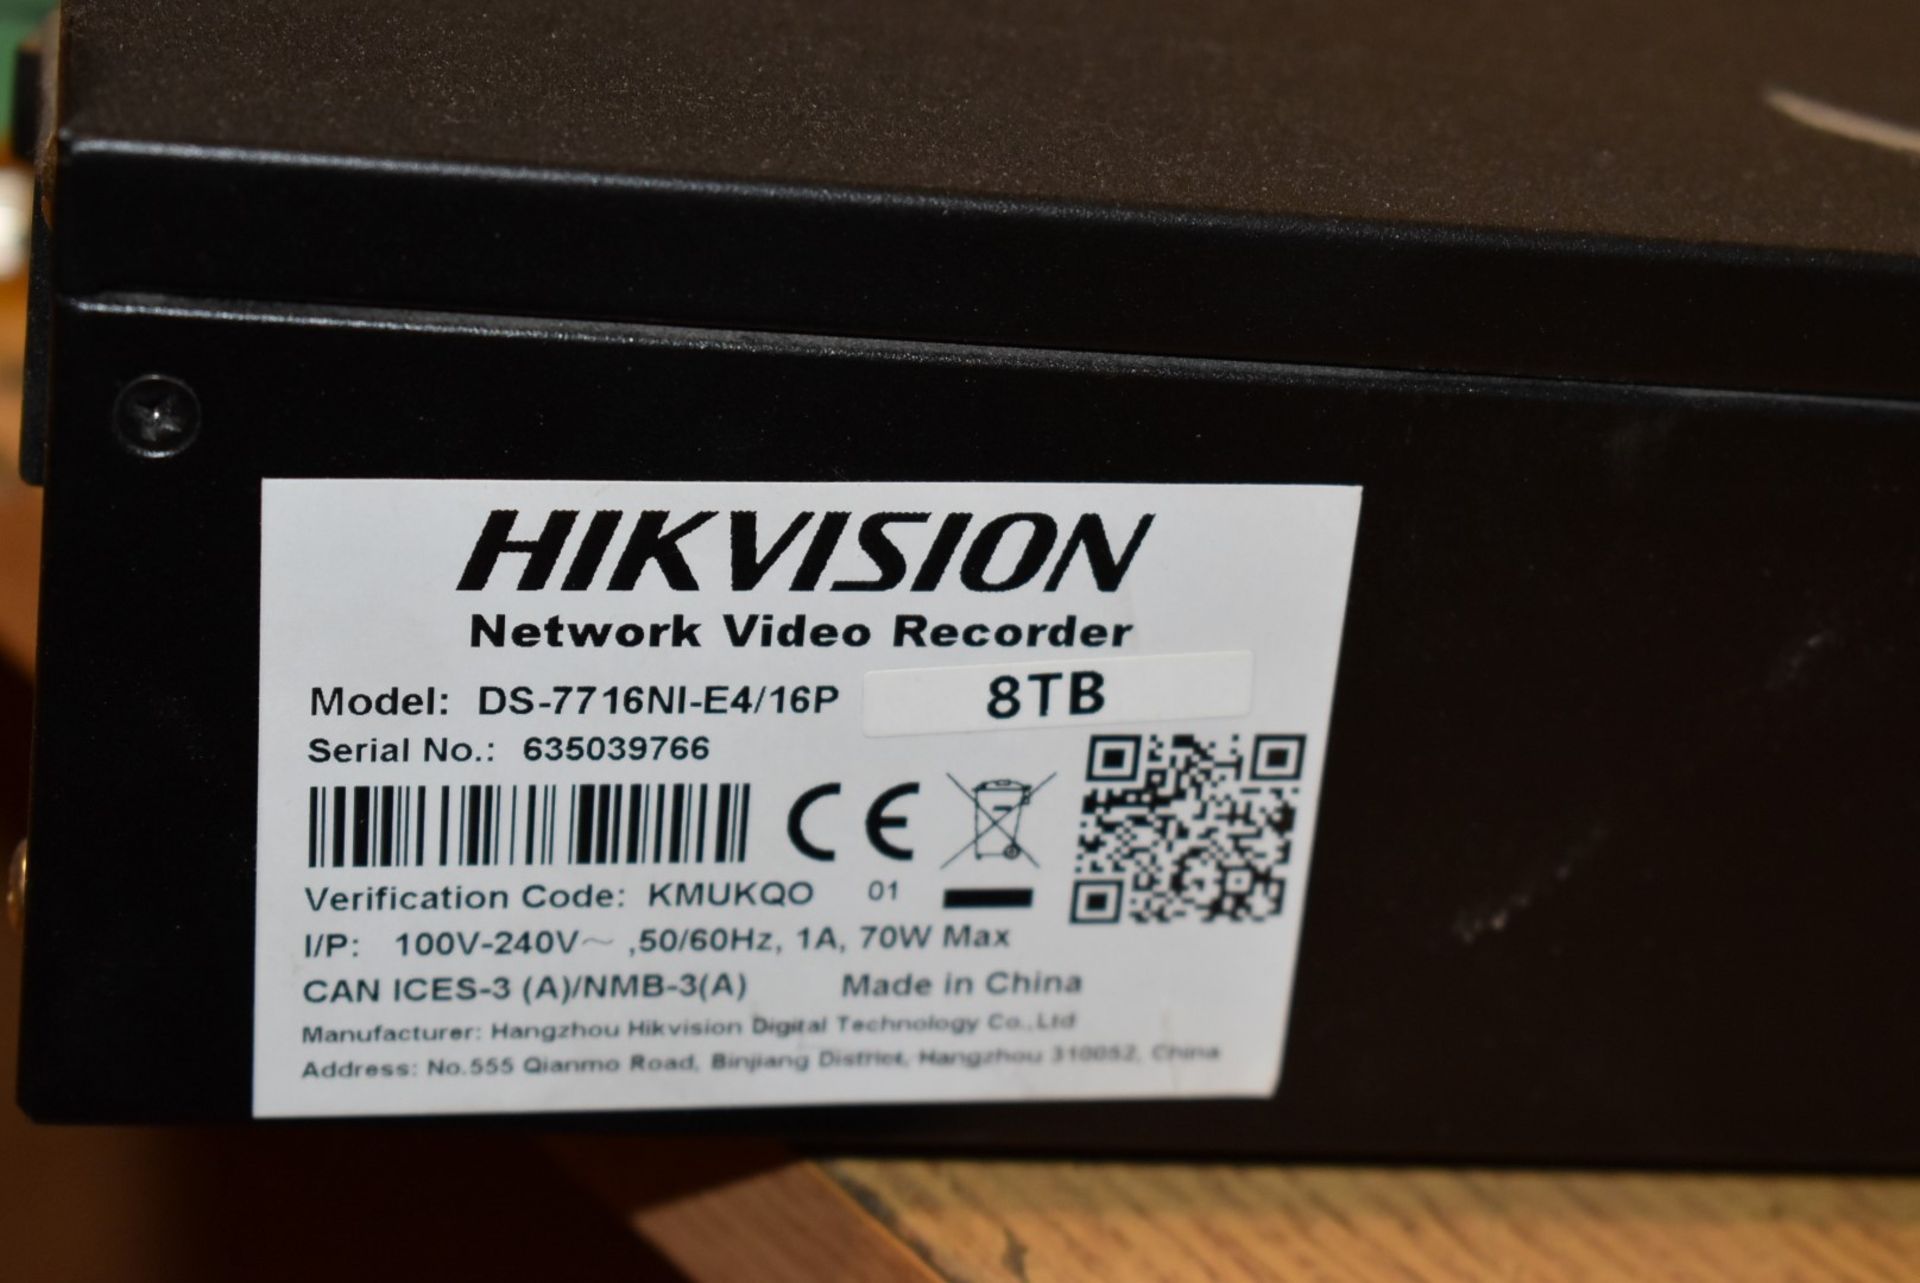 1 x Hikvision 16 Channel Network CCTV Video Recorder With 12 Terrabyte Storage - Model DS-7716NI- - Image 4 of 9